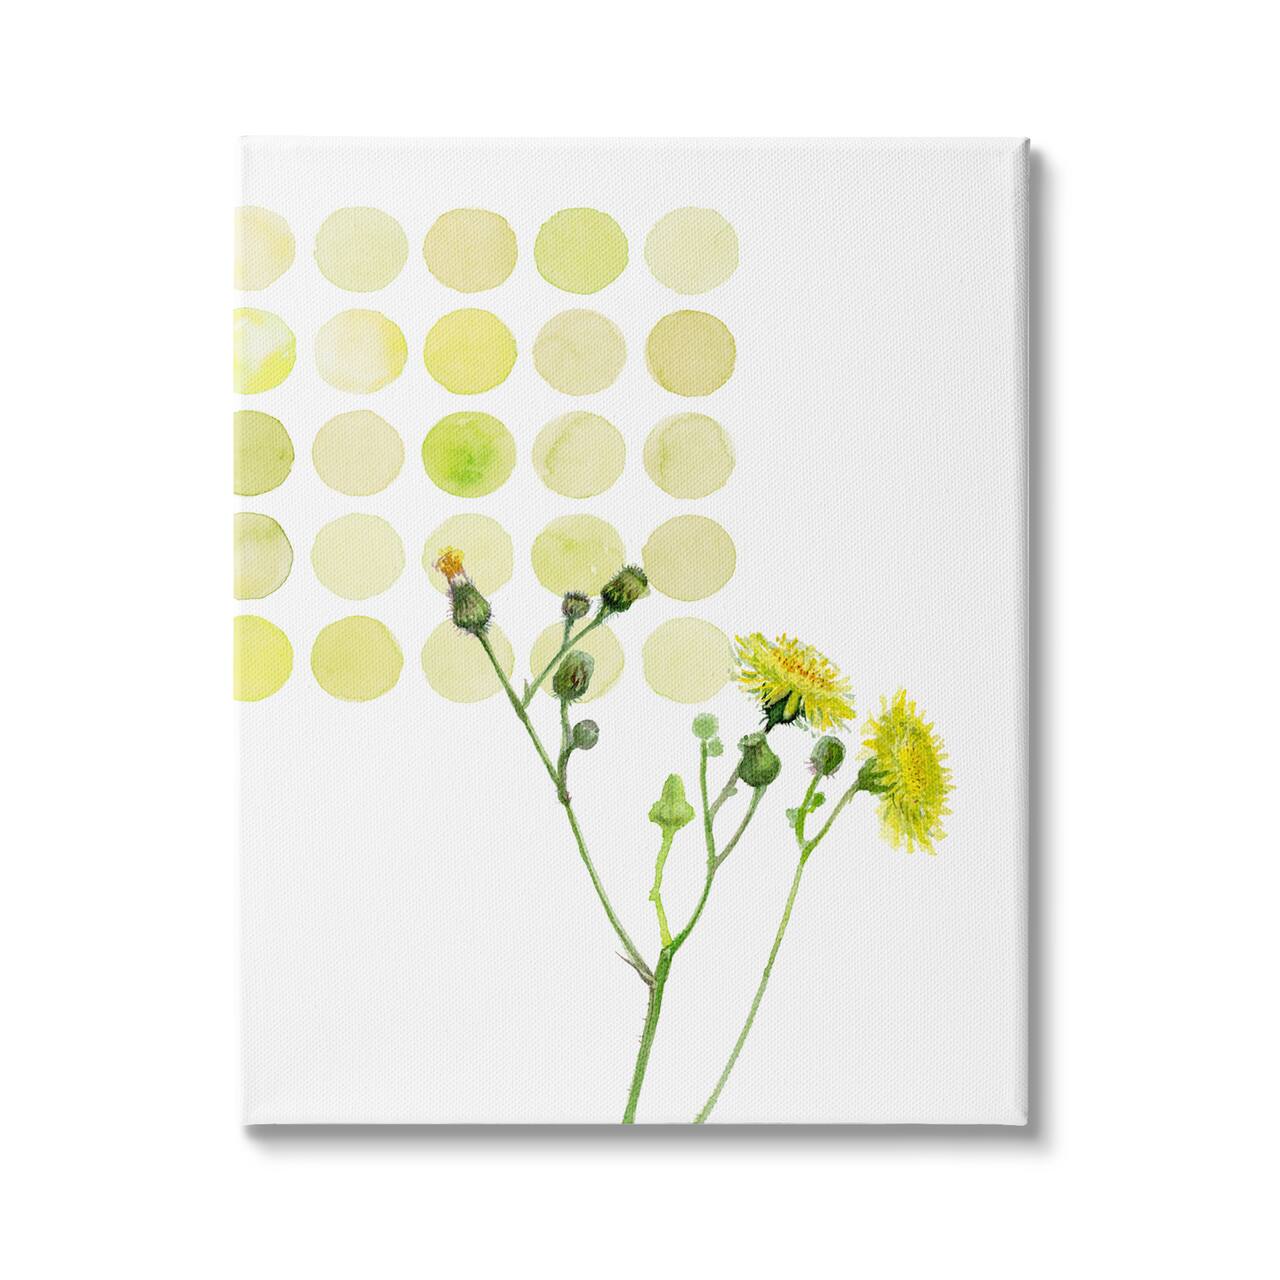 Stupell Industries Dandelion Flowers under Abstract Summer Circles Floral Painting Canvas Wall Art